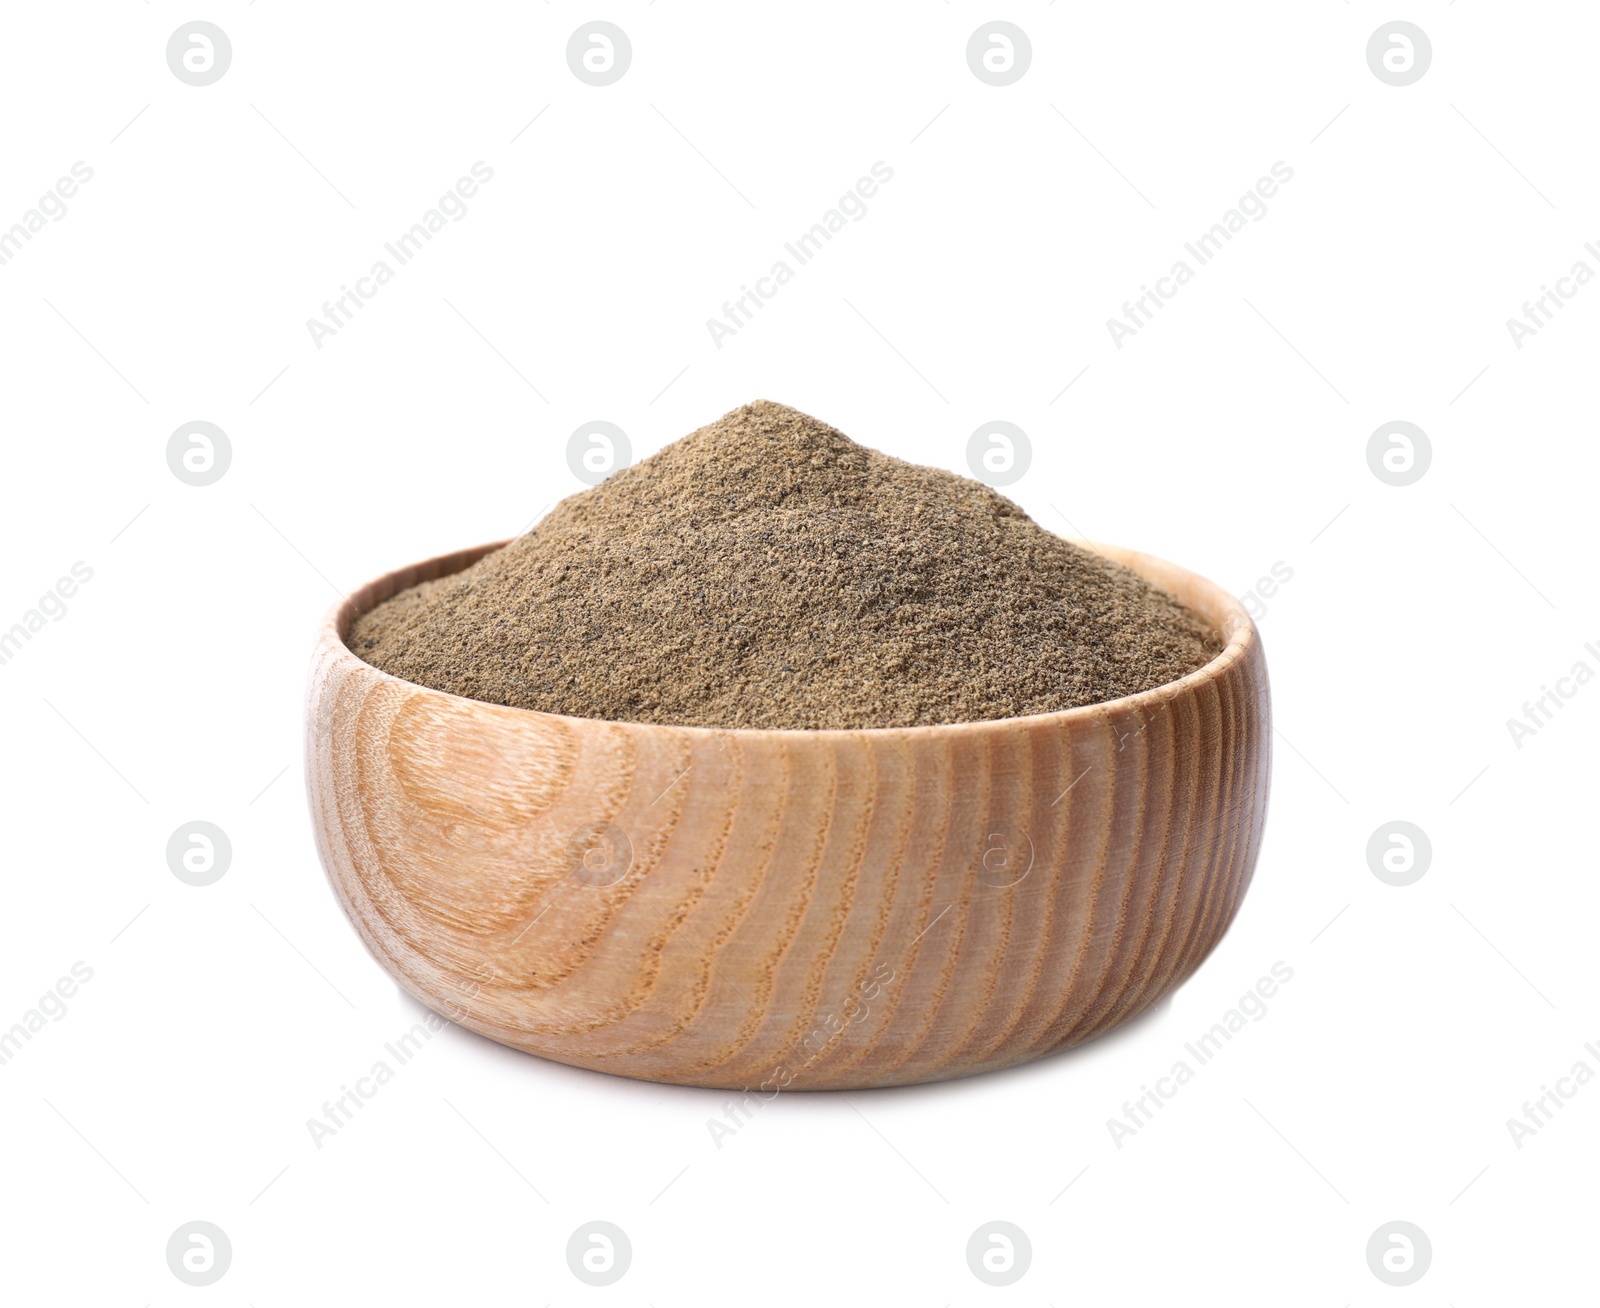 Photo of Milled pepper in wooden bowl isolated on white